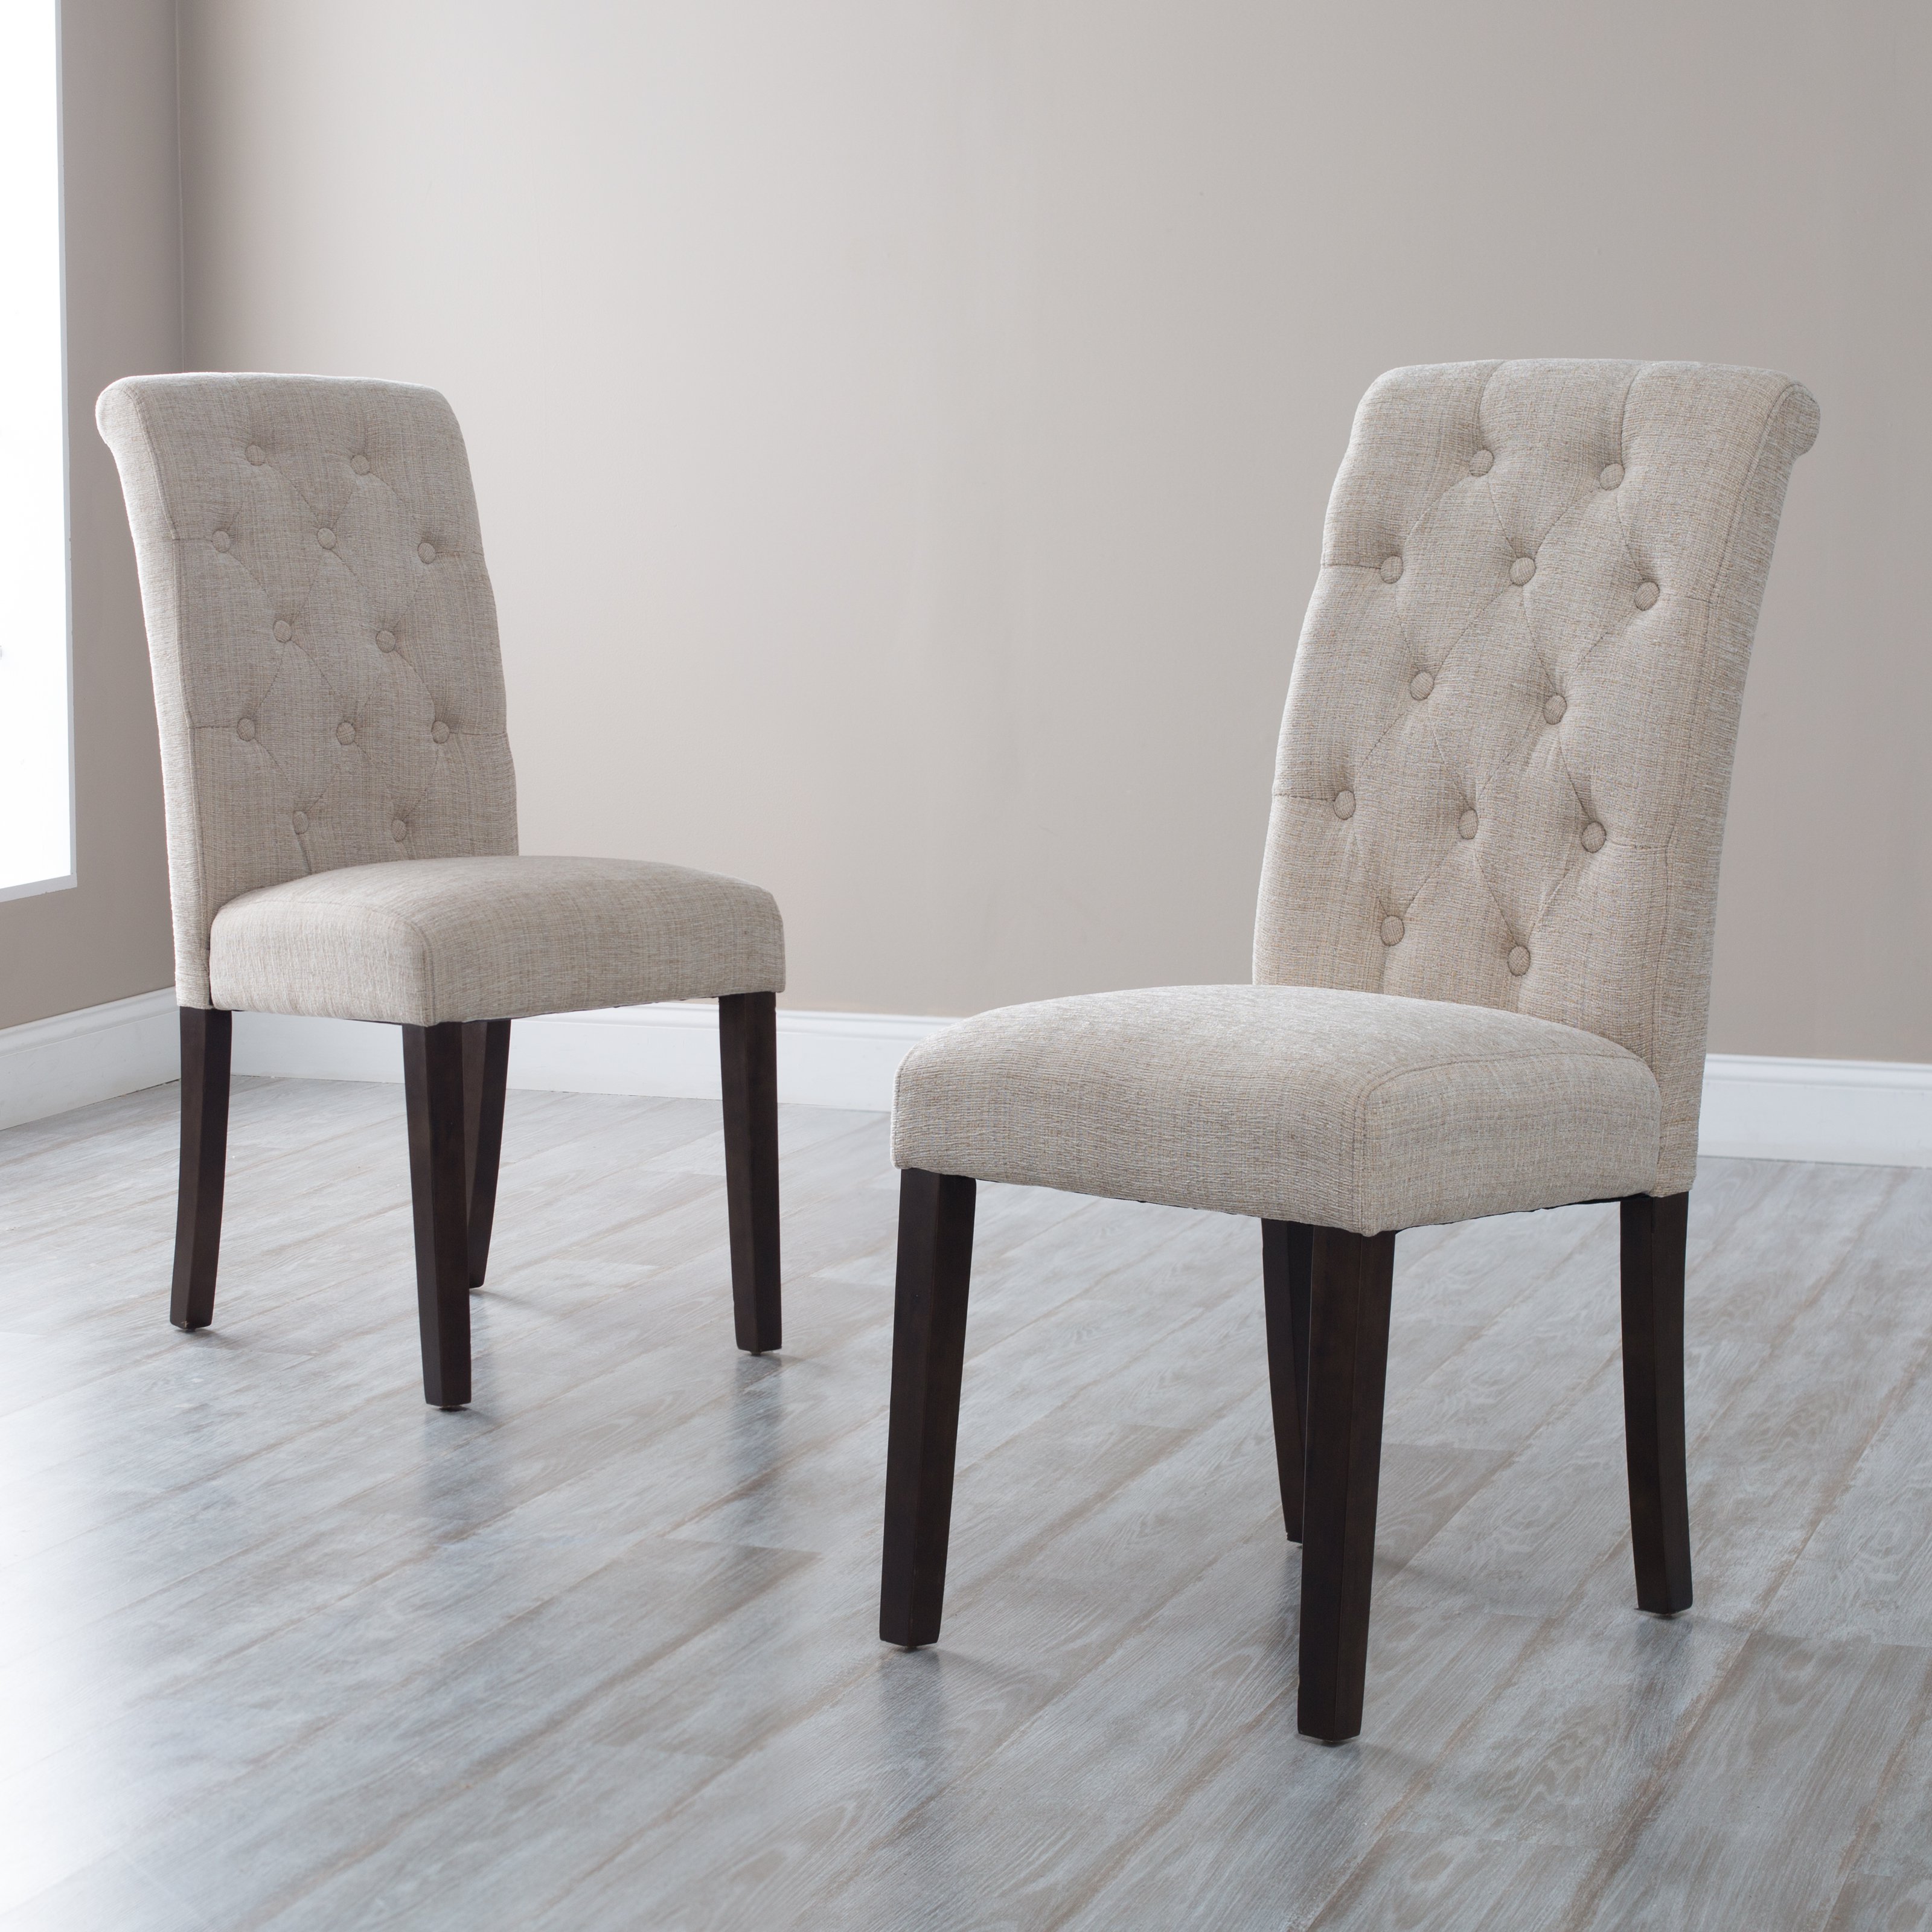 dining chairs morgana tufted parsons dining chair - set of 2 OVGRKVF